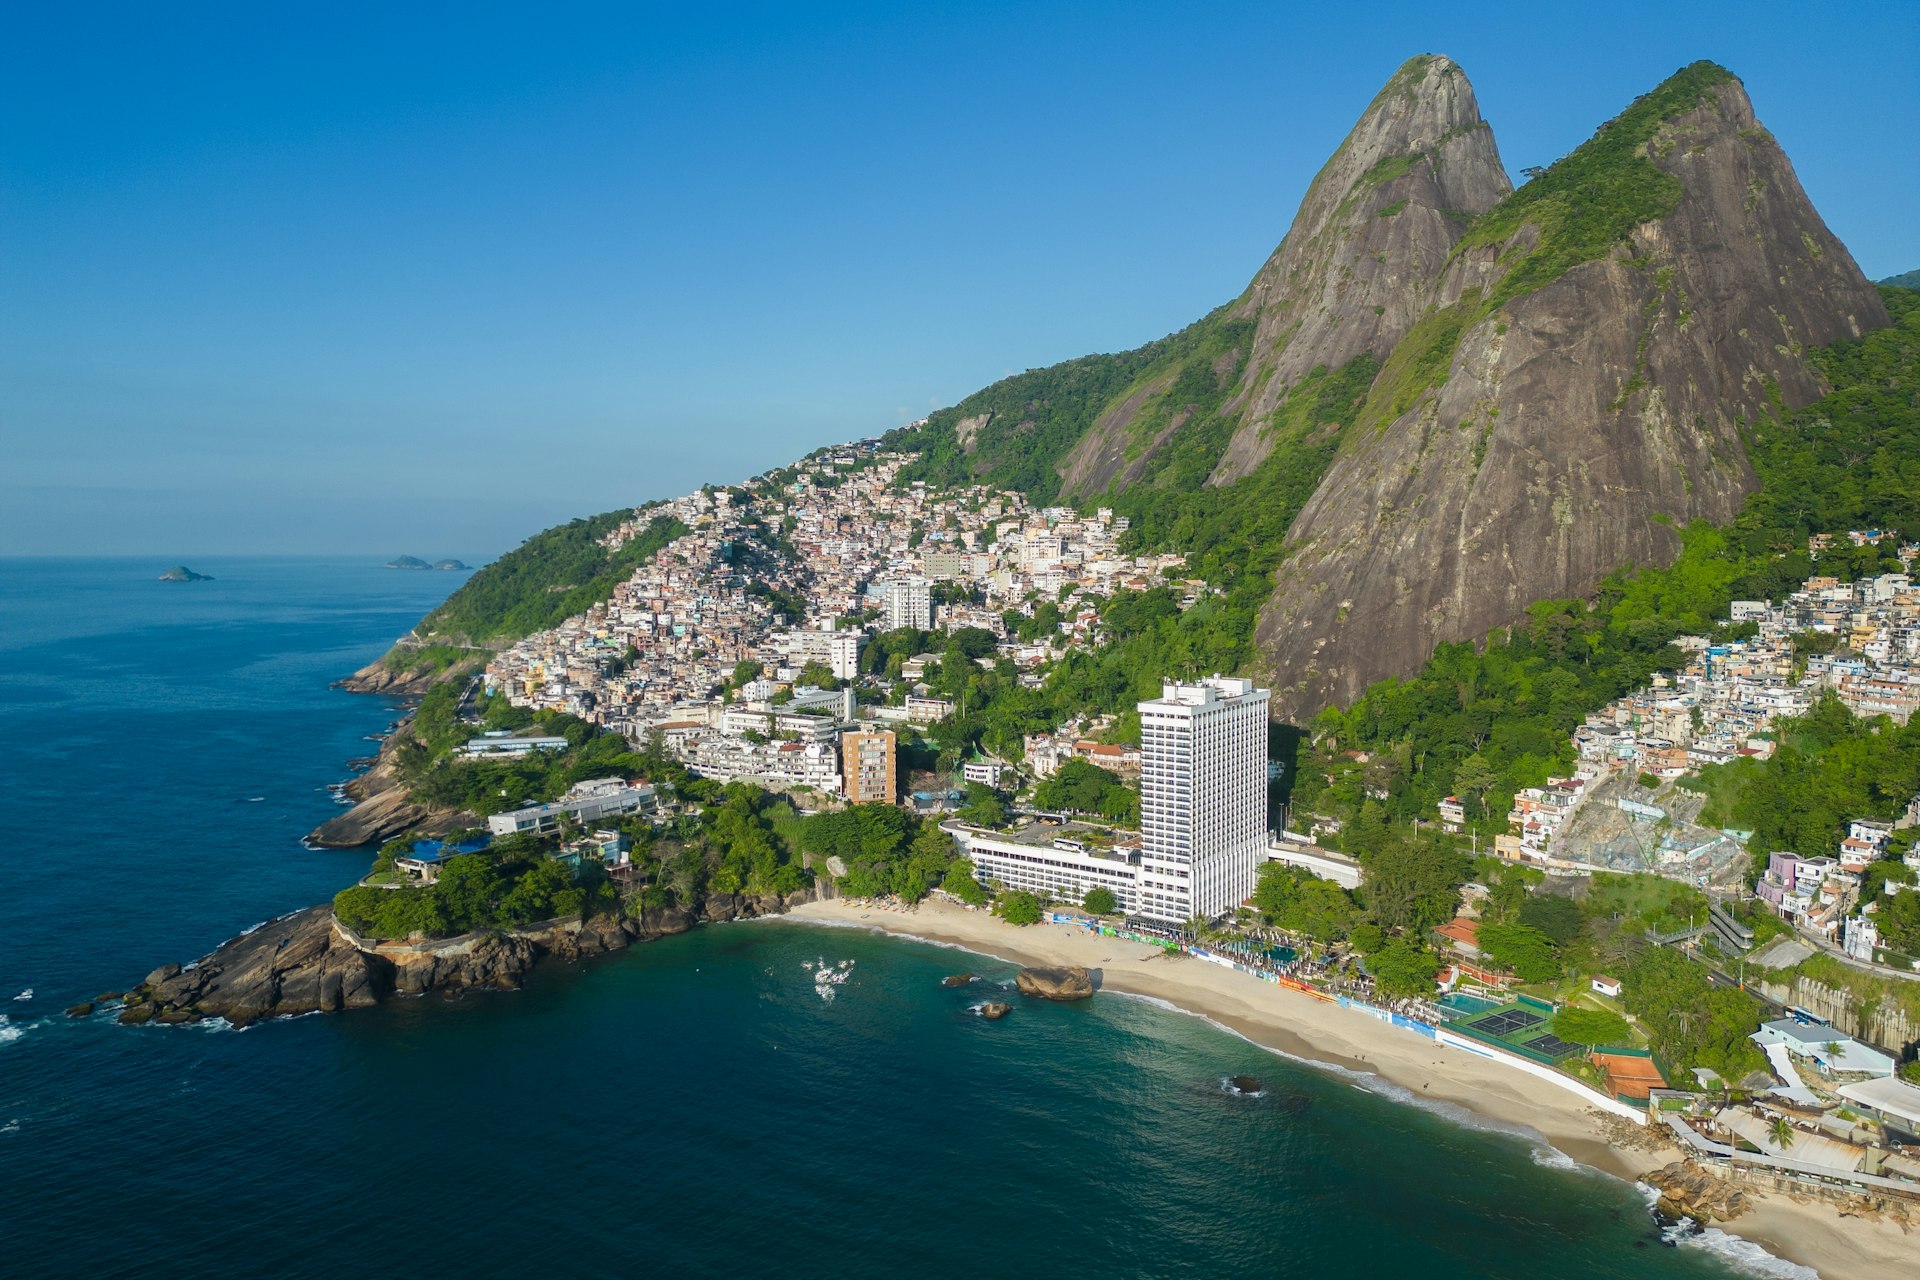 Aerial view of Two Brothers mountain with Vidigal on its side and the beach below